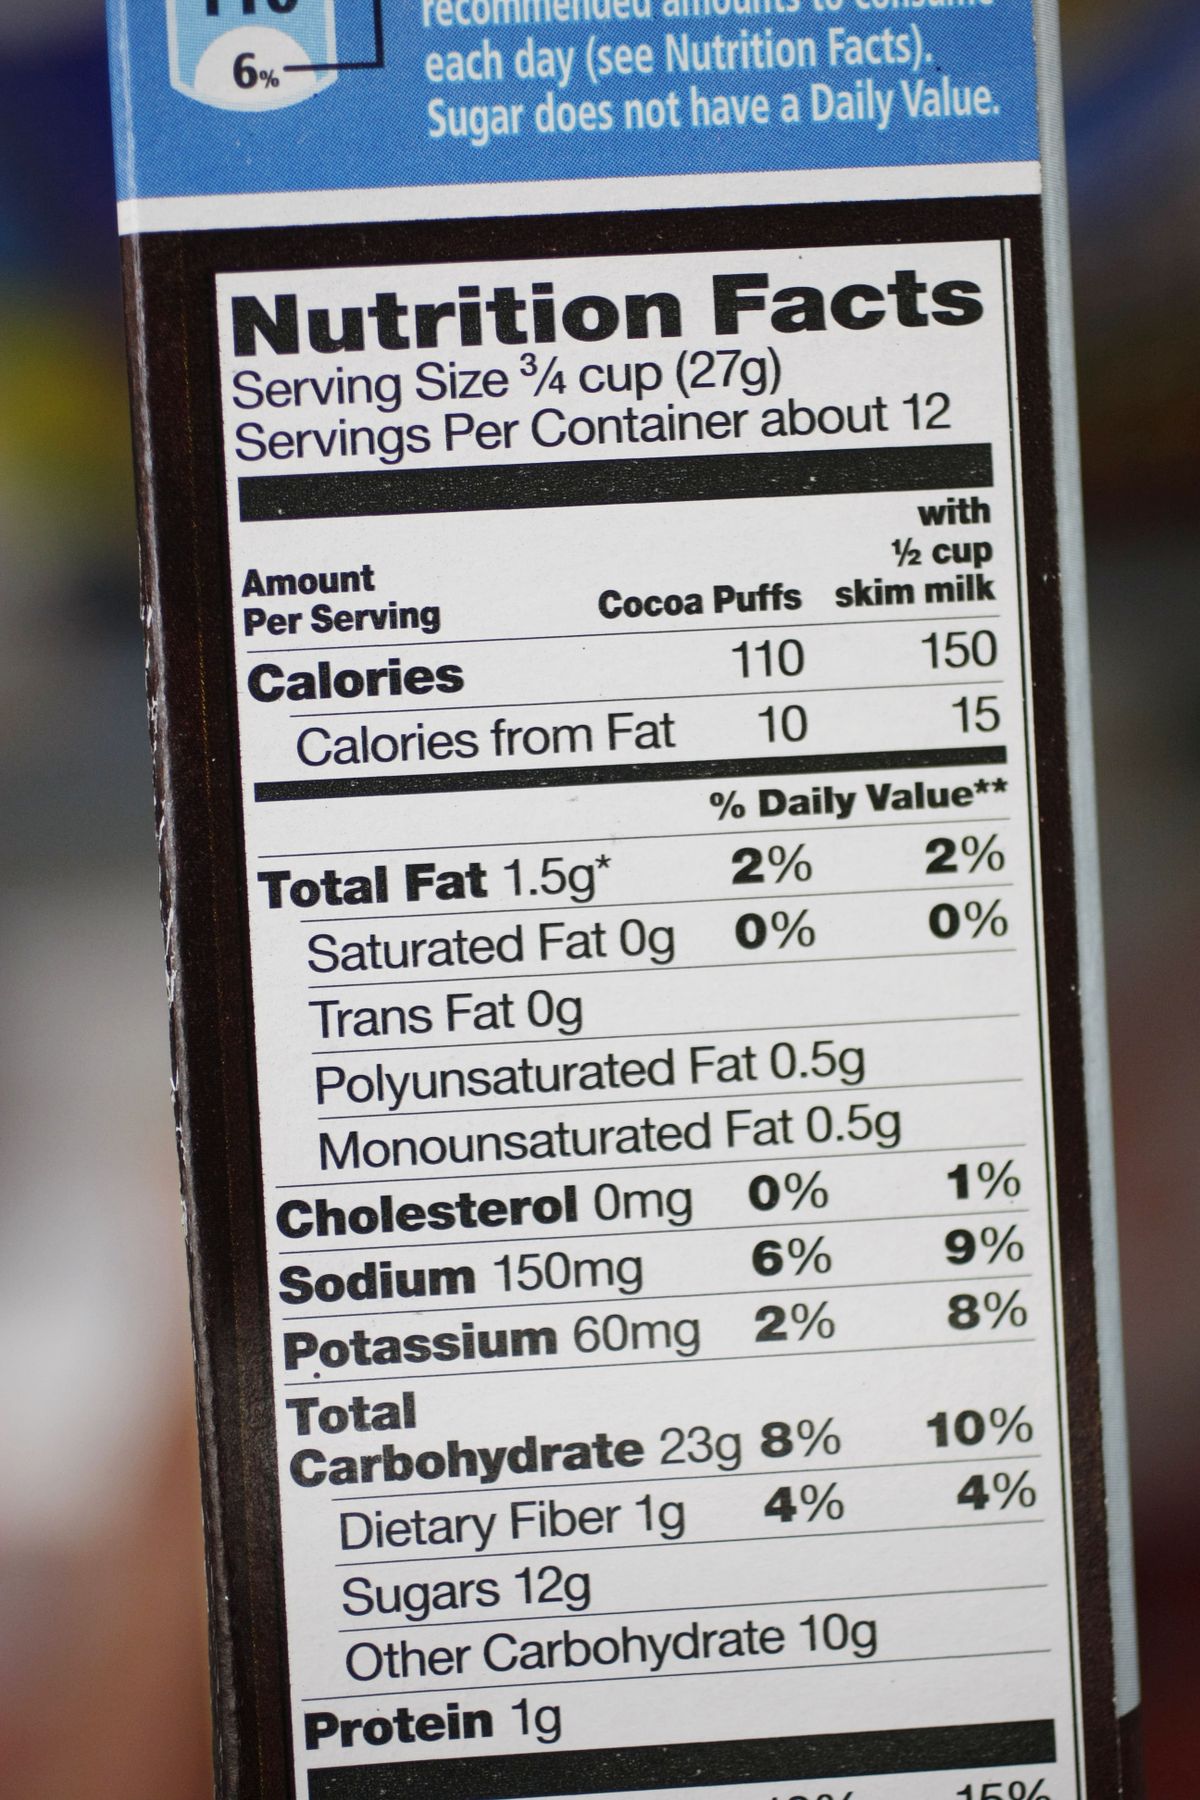 Nutritional information is seen on a box of General Mills’ Cocoa Puffs at a store in California.